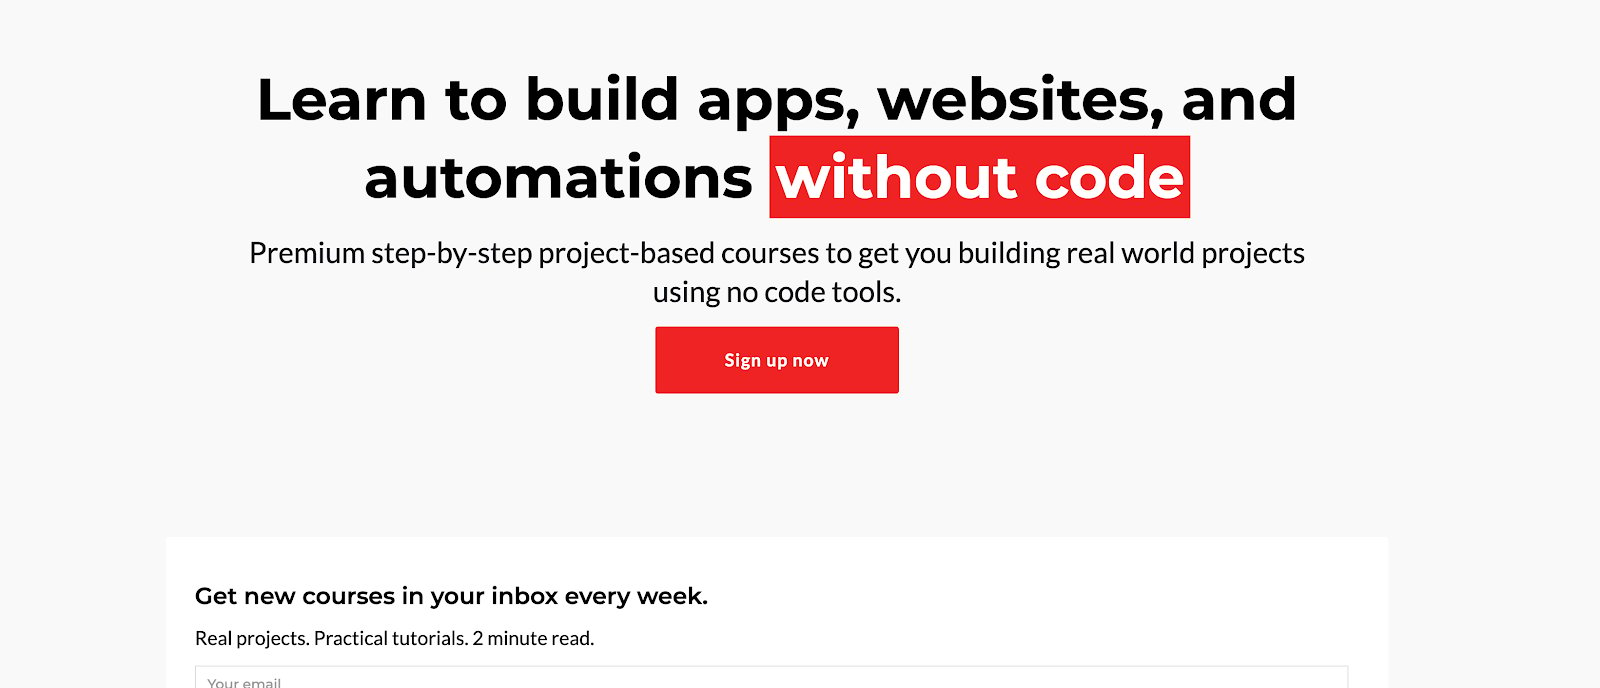 the-6k-month-website-that-teaches-how-to-launch-businesses-and-build-apps-with-no-code-tools